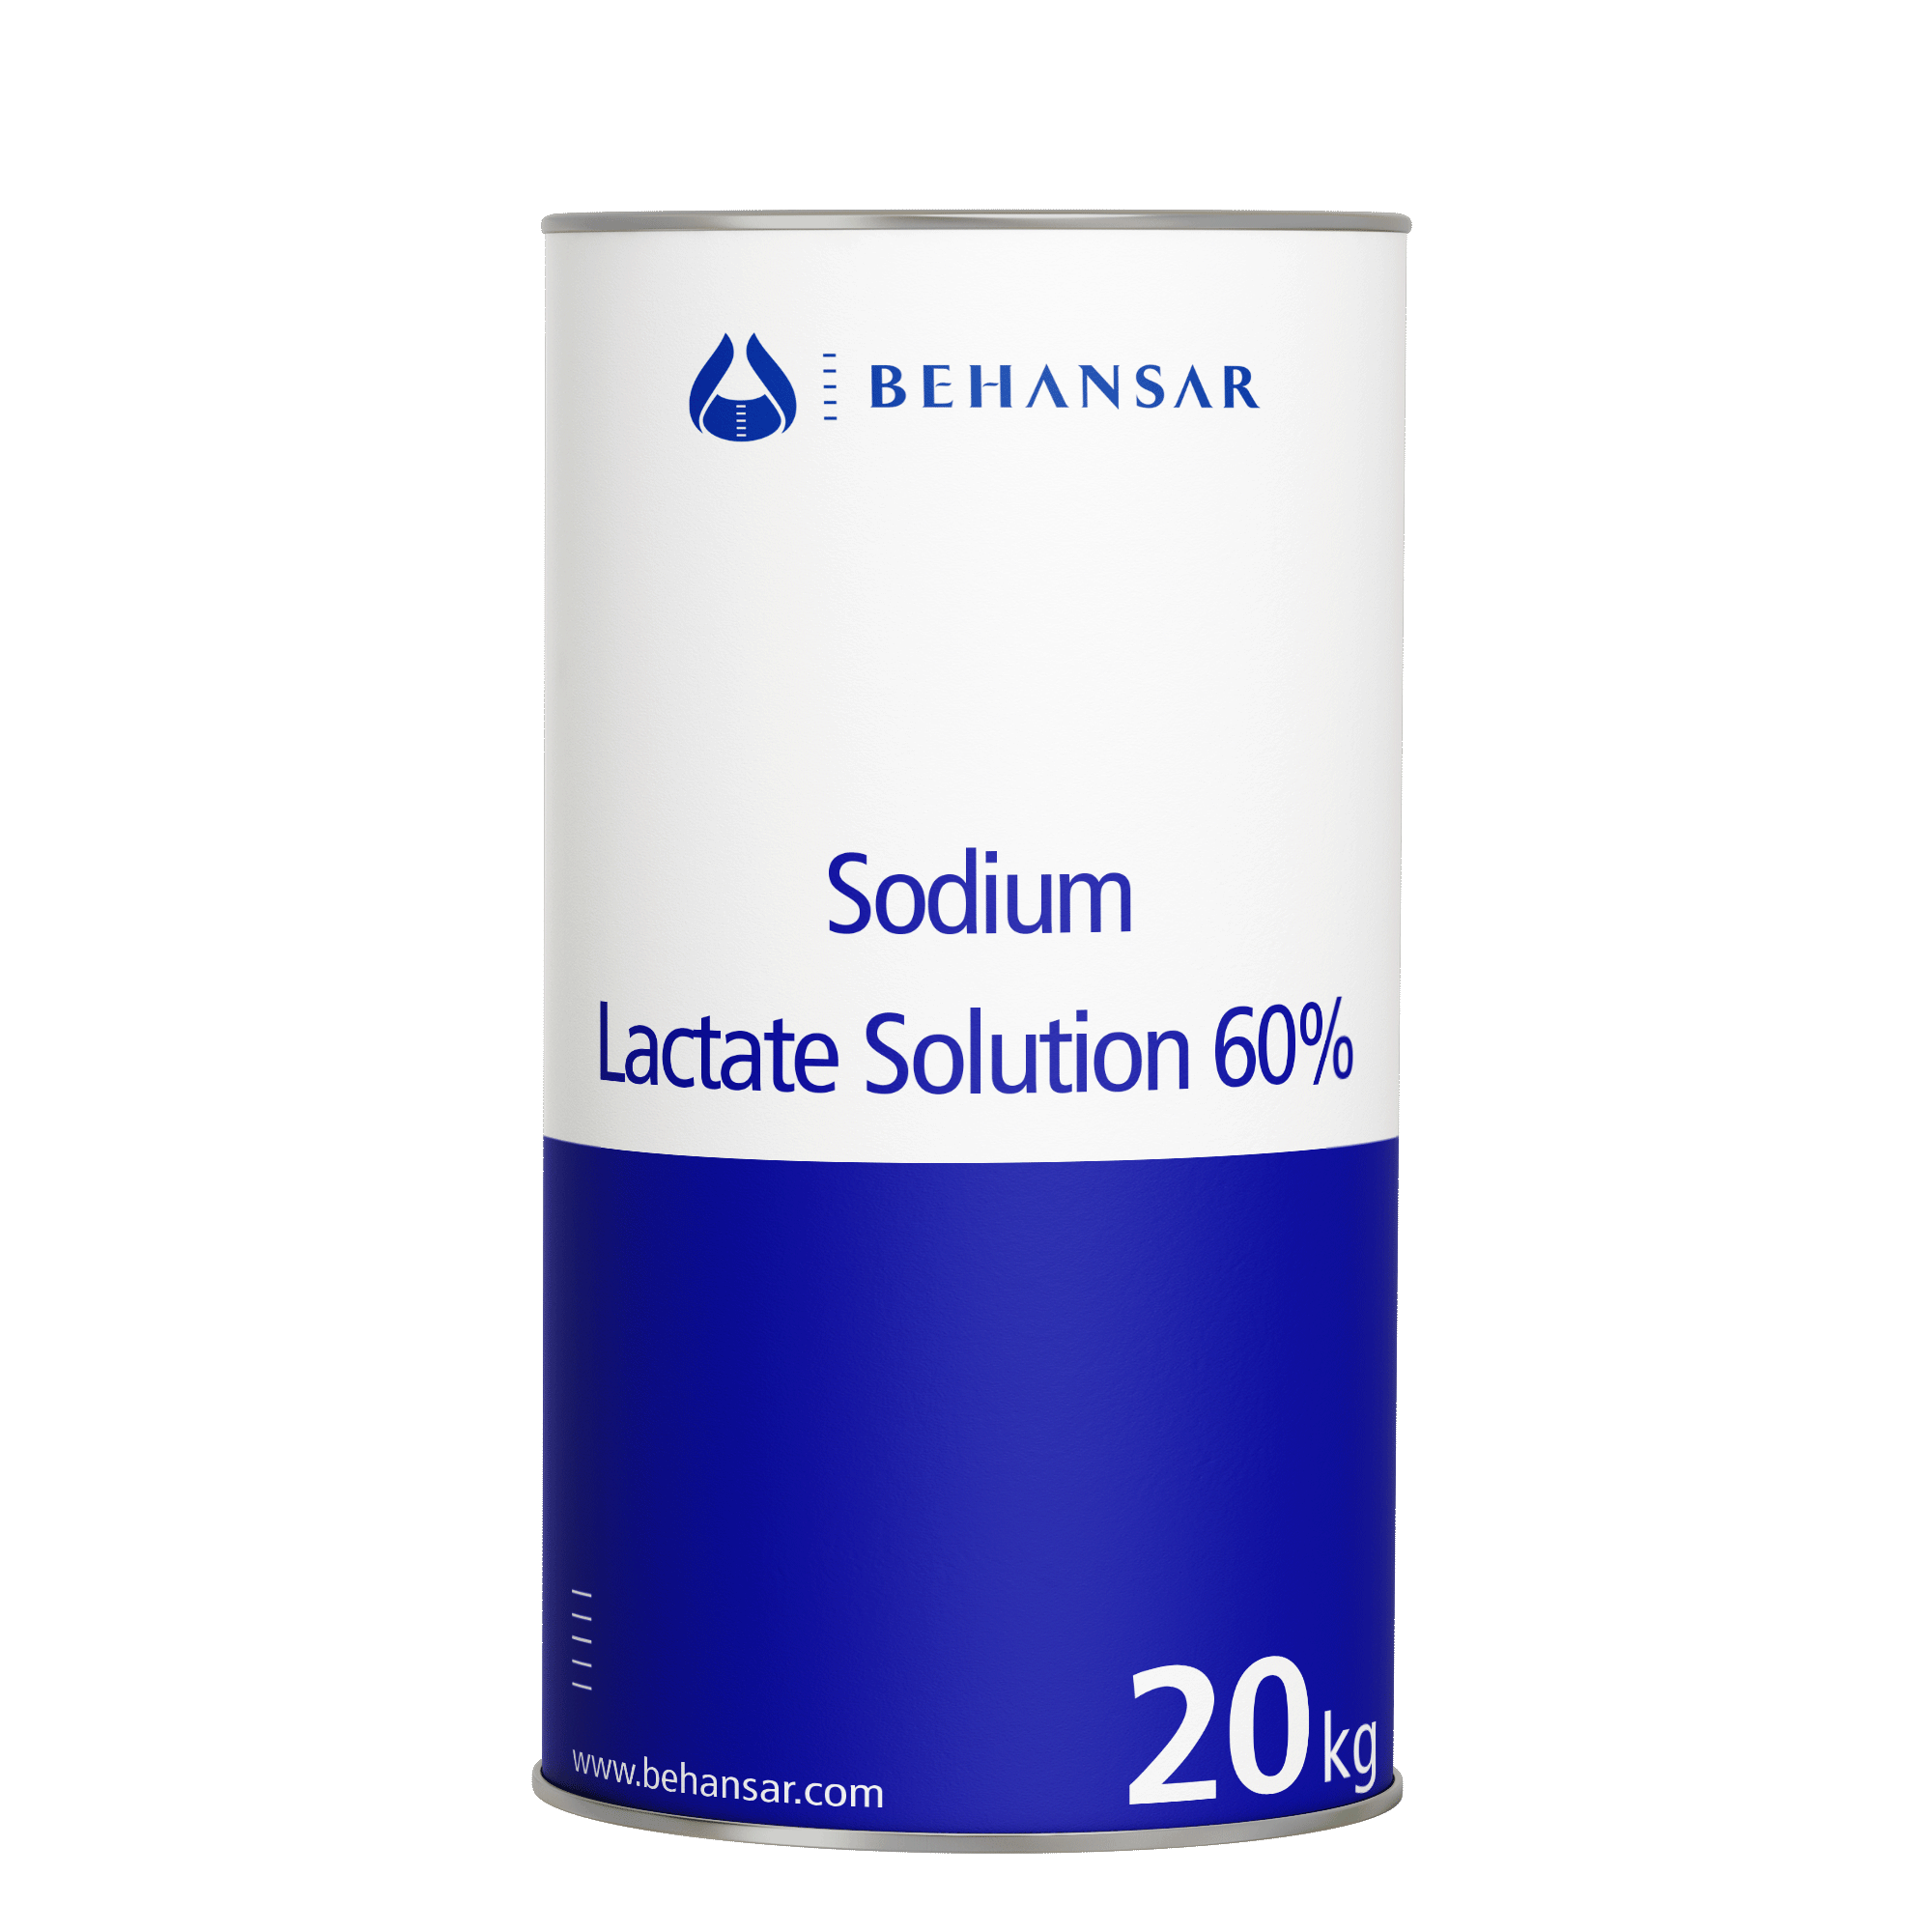 Sodium Lactate Solution 60% is one of the products of Behansar Co